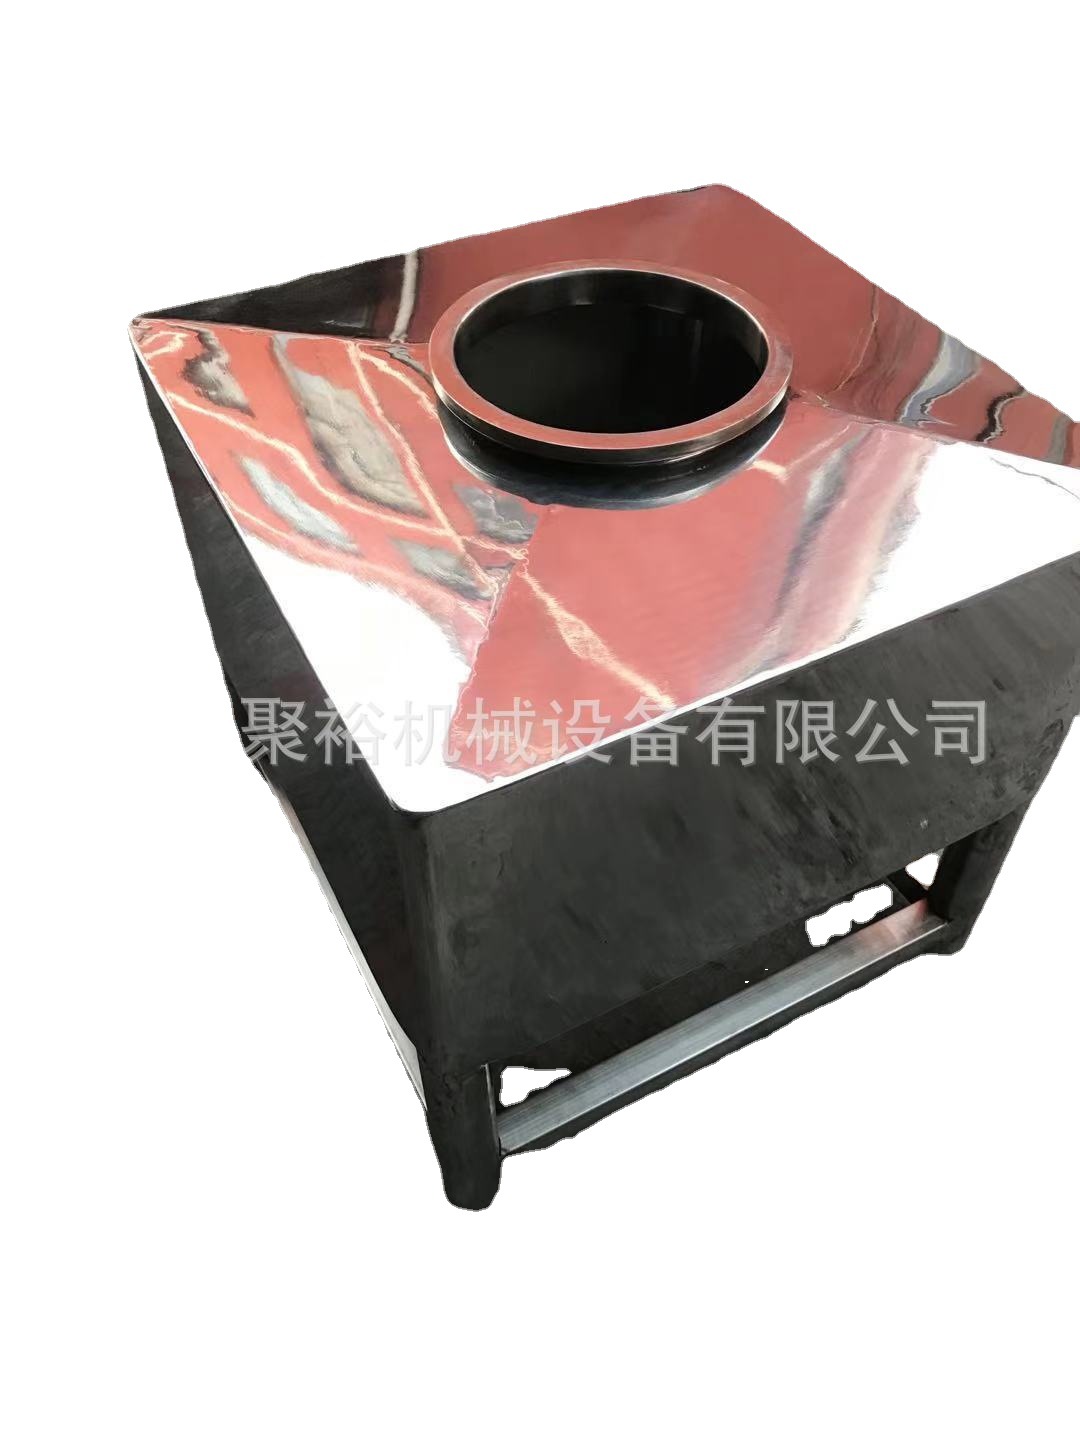 Stainless steel Hopper Conical hopper Customized hopper Object cone Hopper Manufactor Primary sources